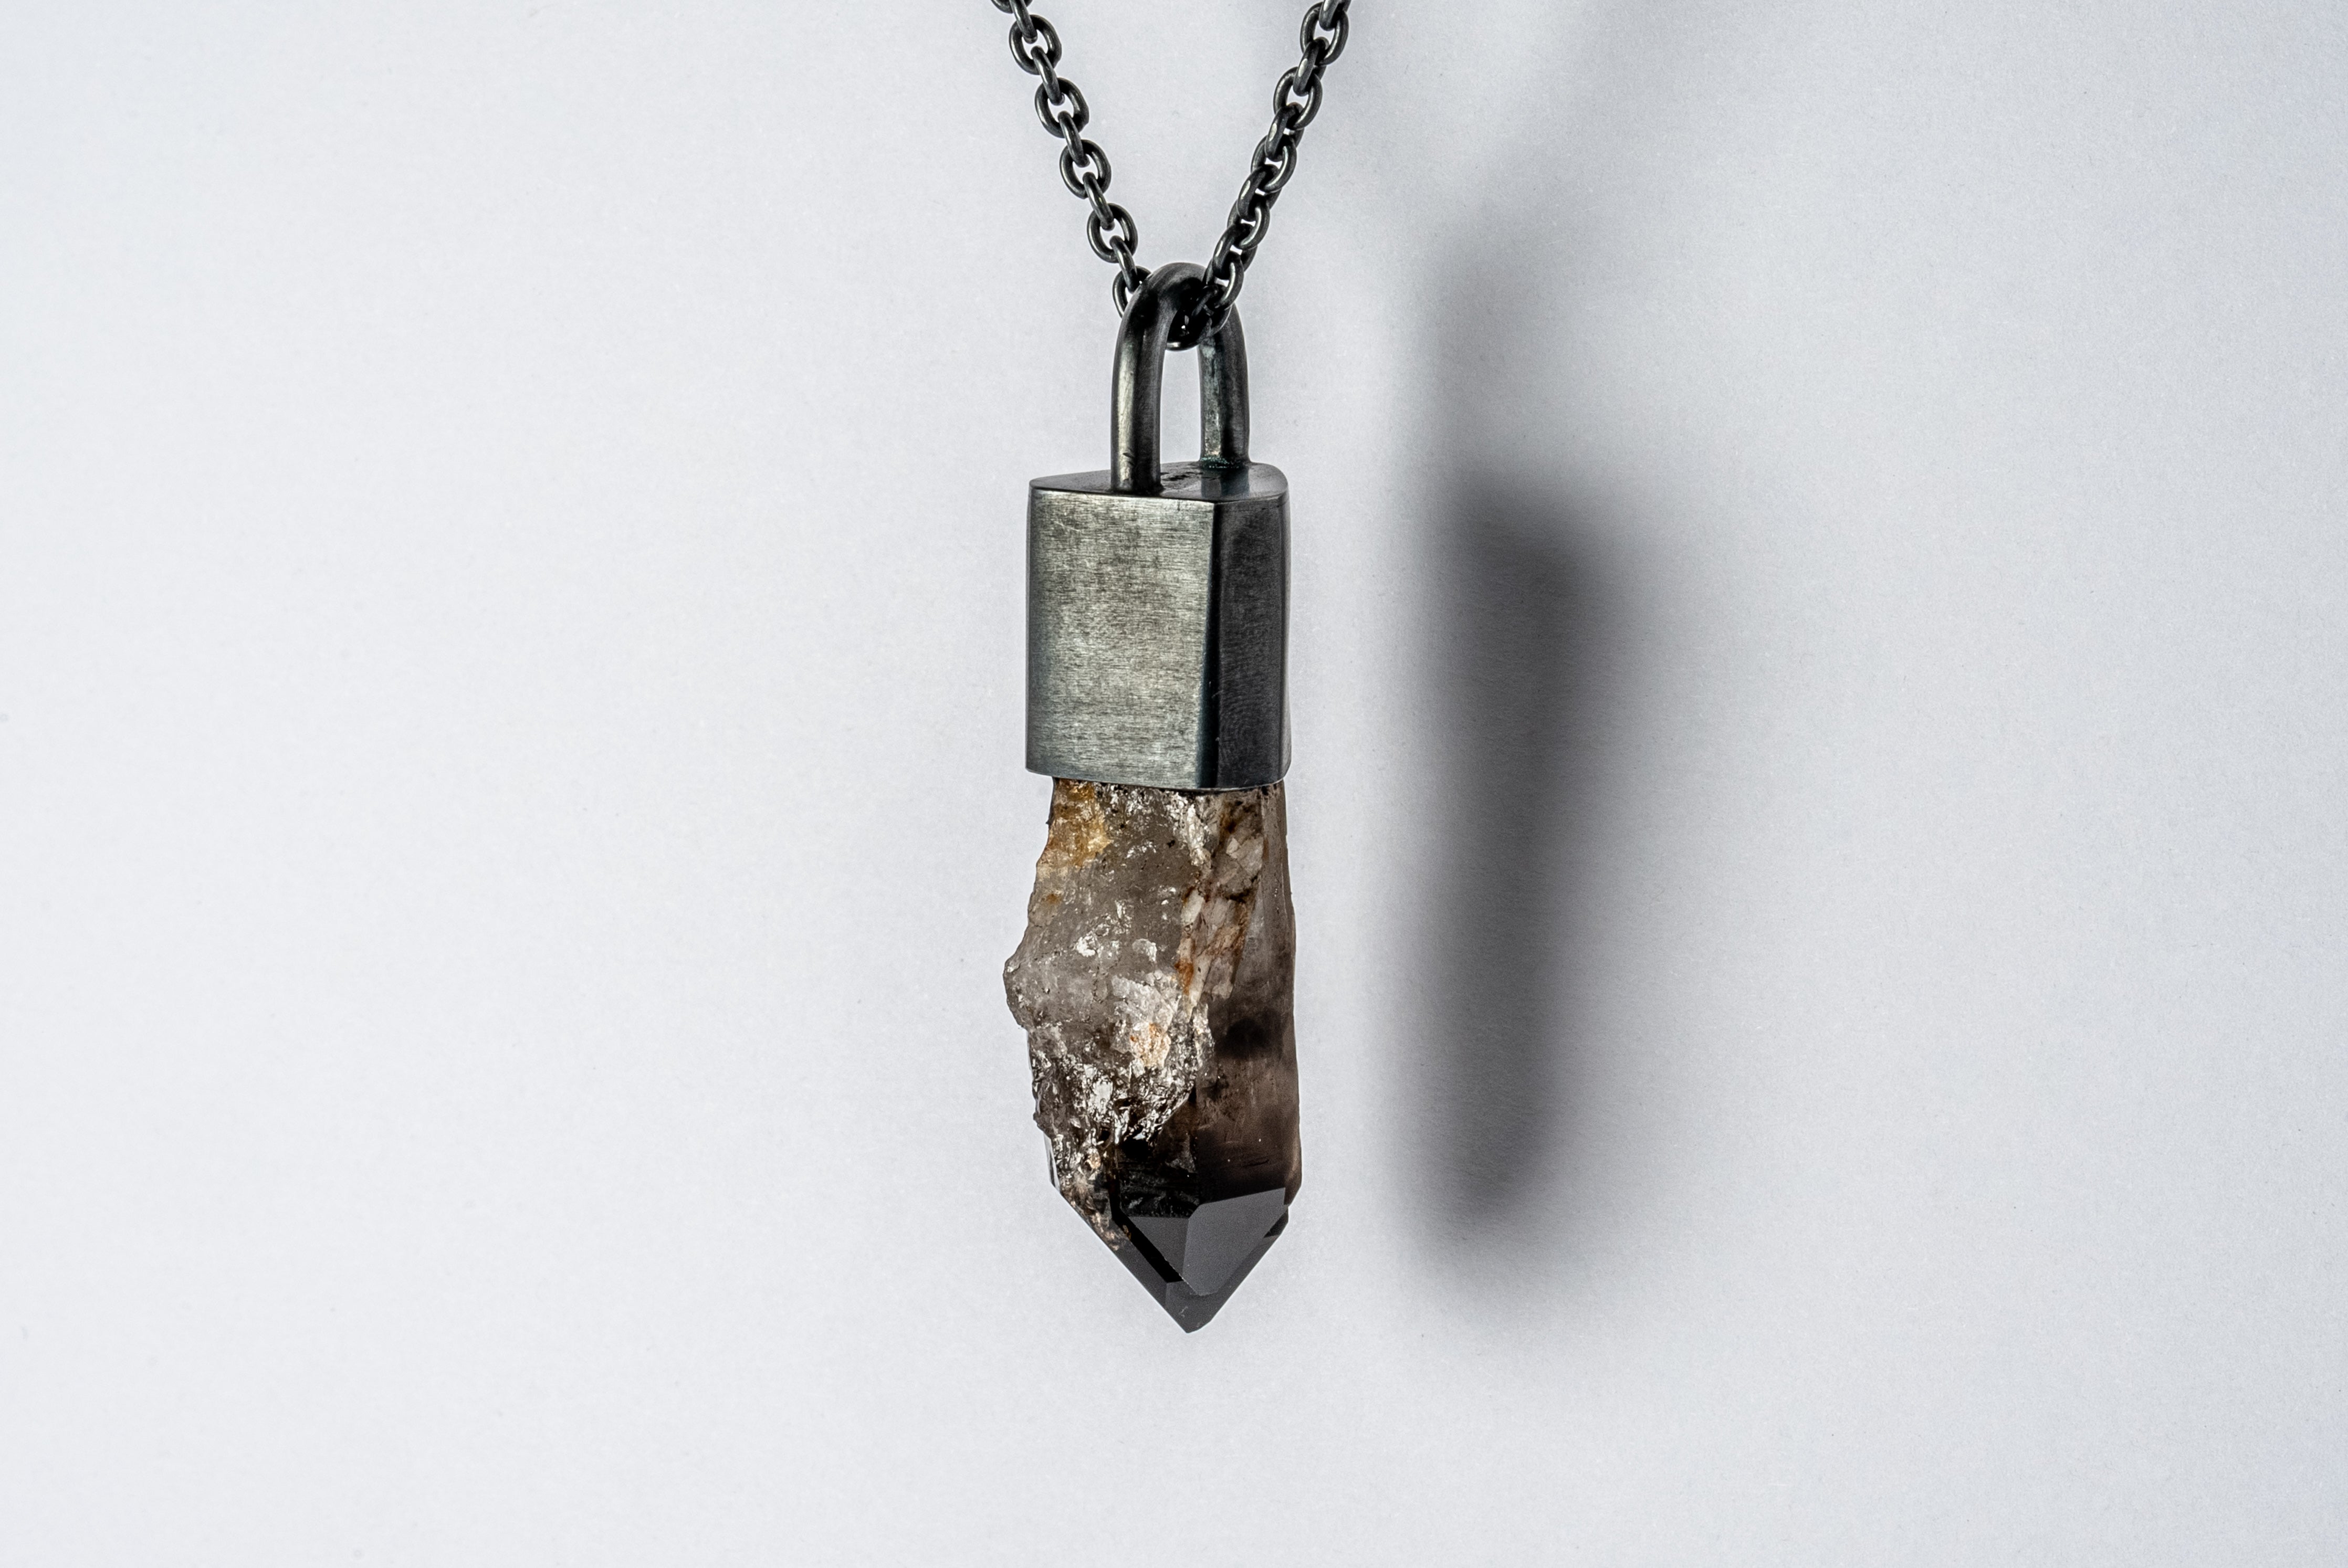 Parts of Four Talisman Necklace シルバー925 大勧め 51.0%OFF ...